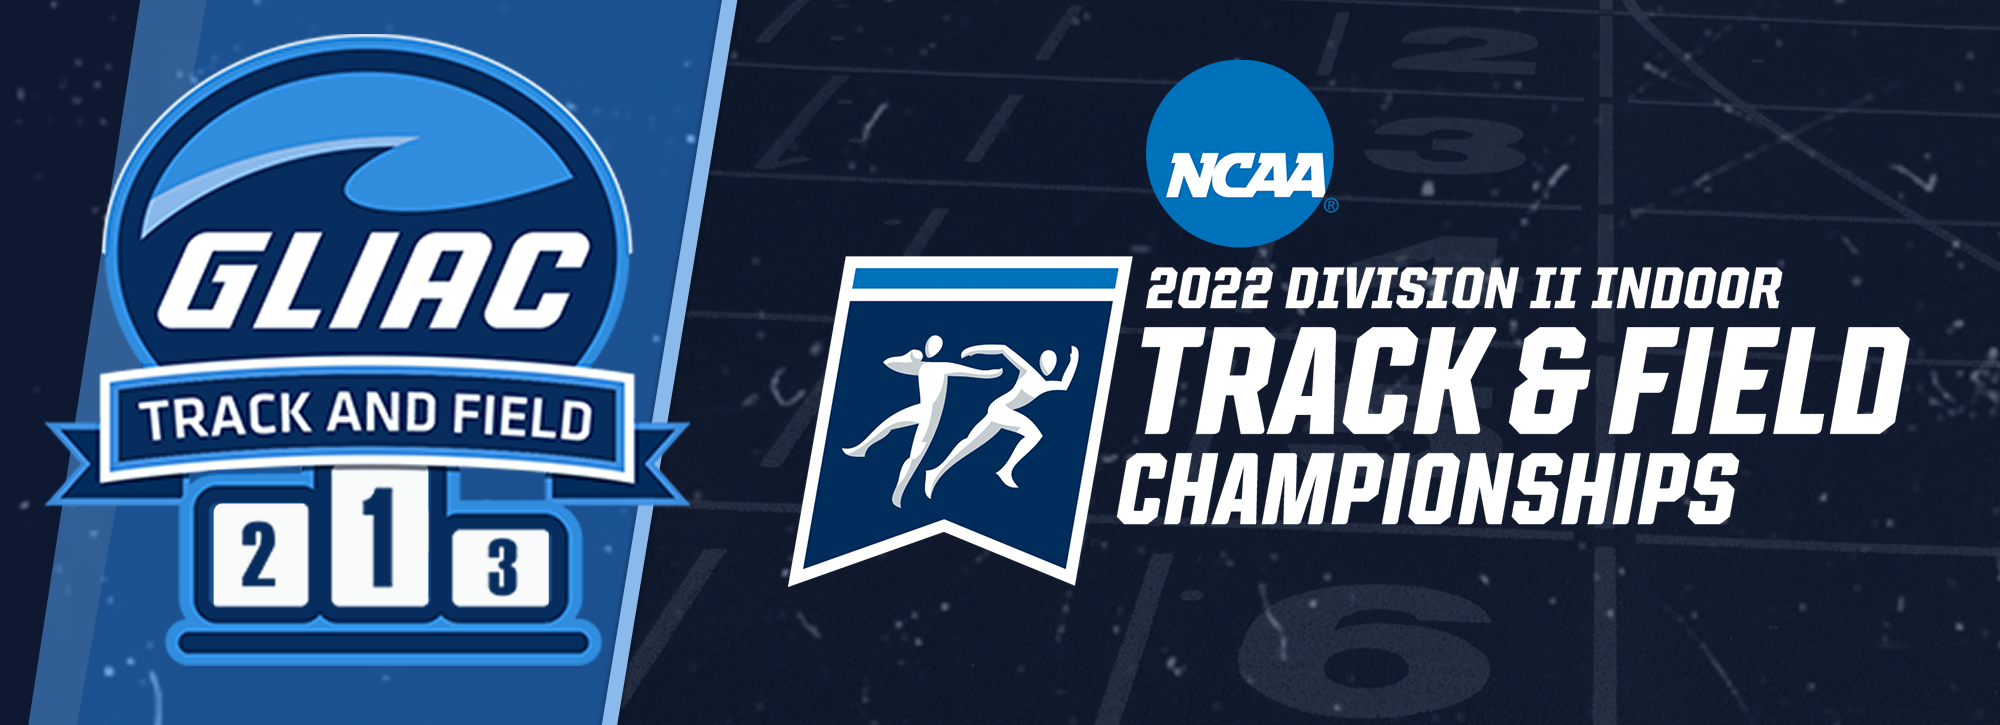 GLIAC athletes set to compete at NCAA Division II Indoor Track & Field Championships